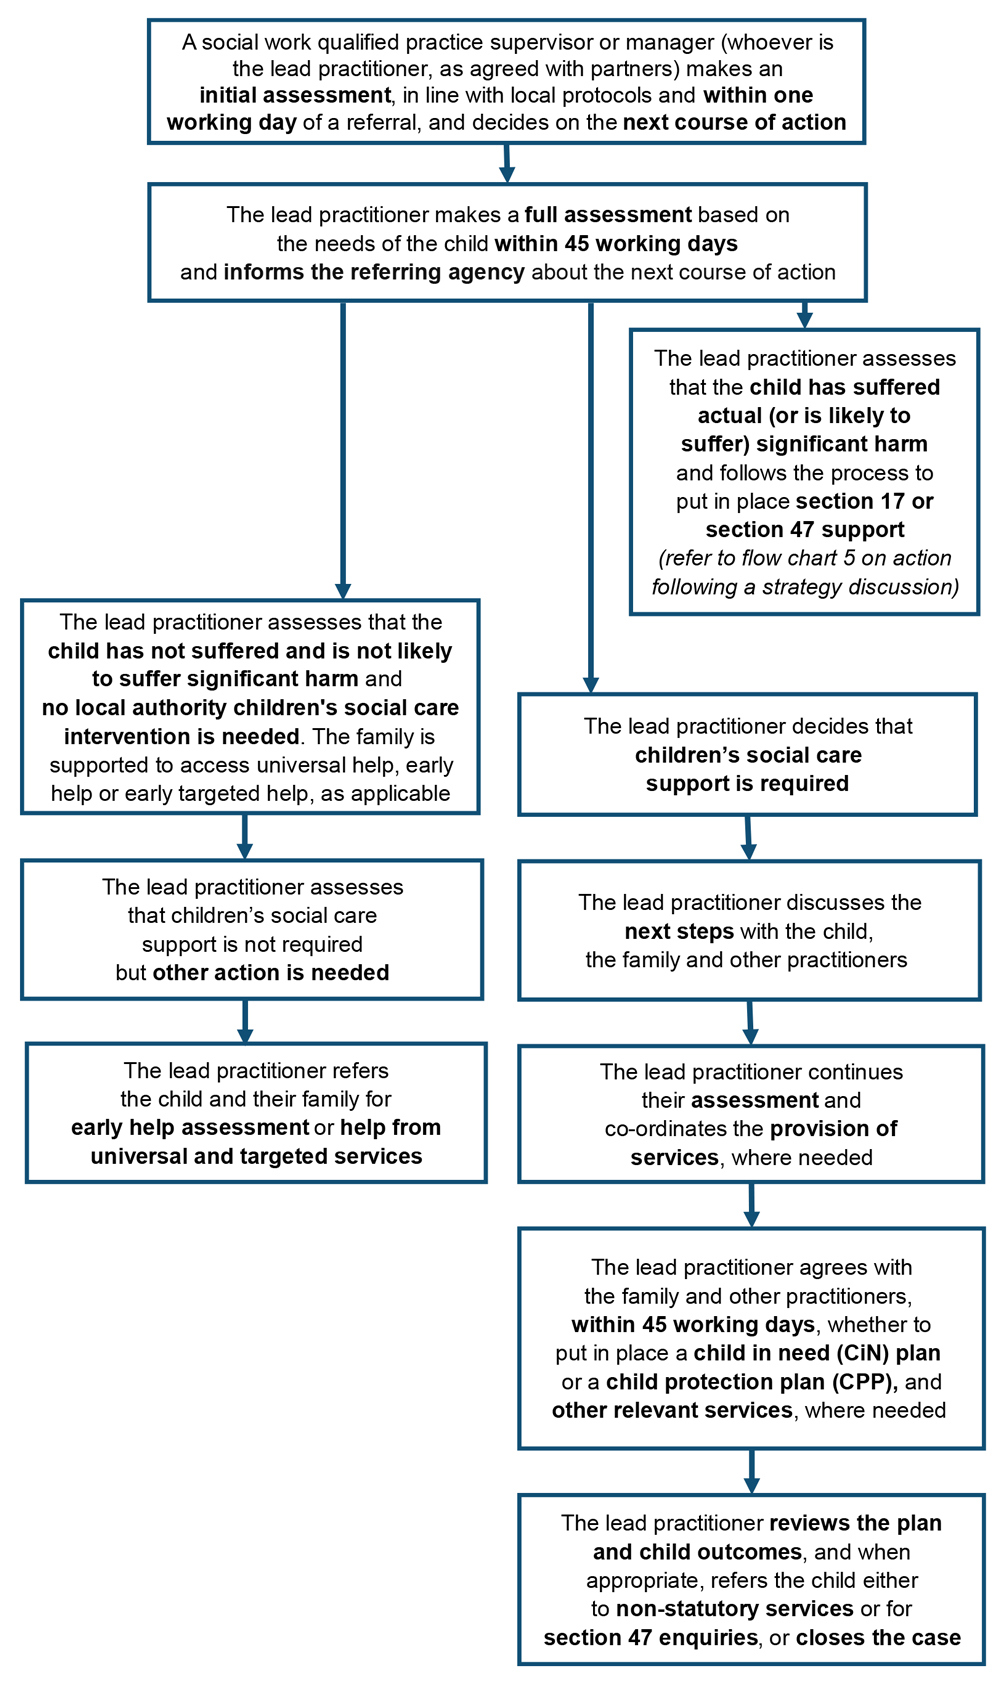 4.4 Flowchart 4: Action taken for an assessment of a child under the Children Act 1989